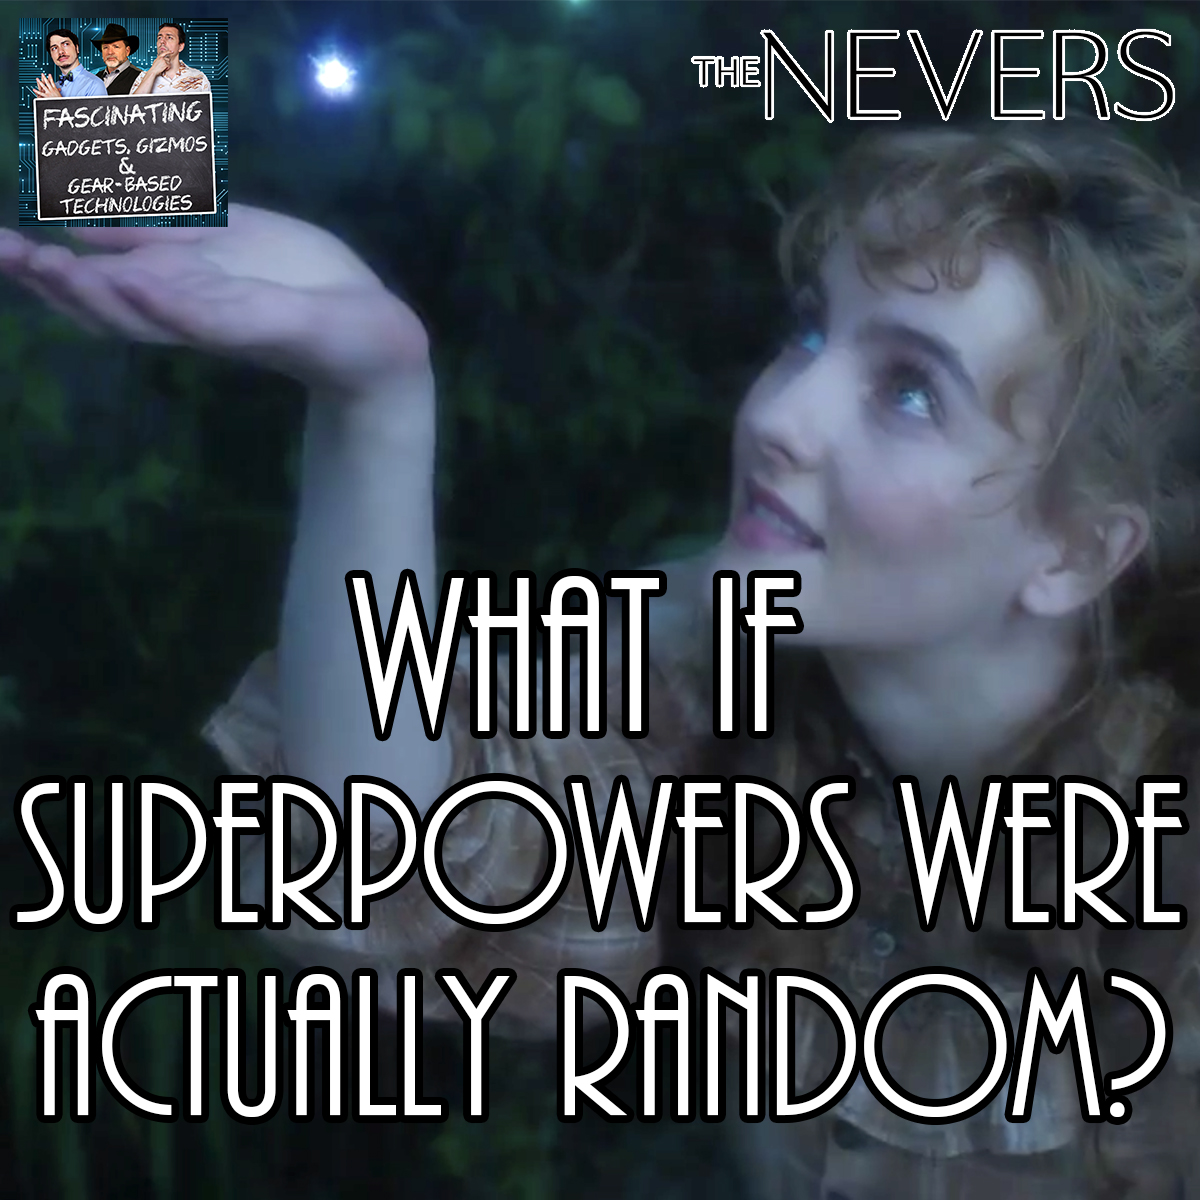 You are currently viewing Ep. 117 What if Superpowers were Actually Random?